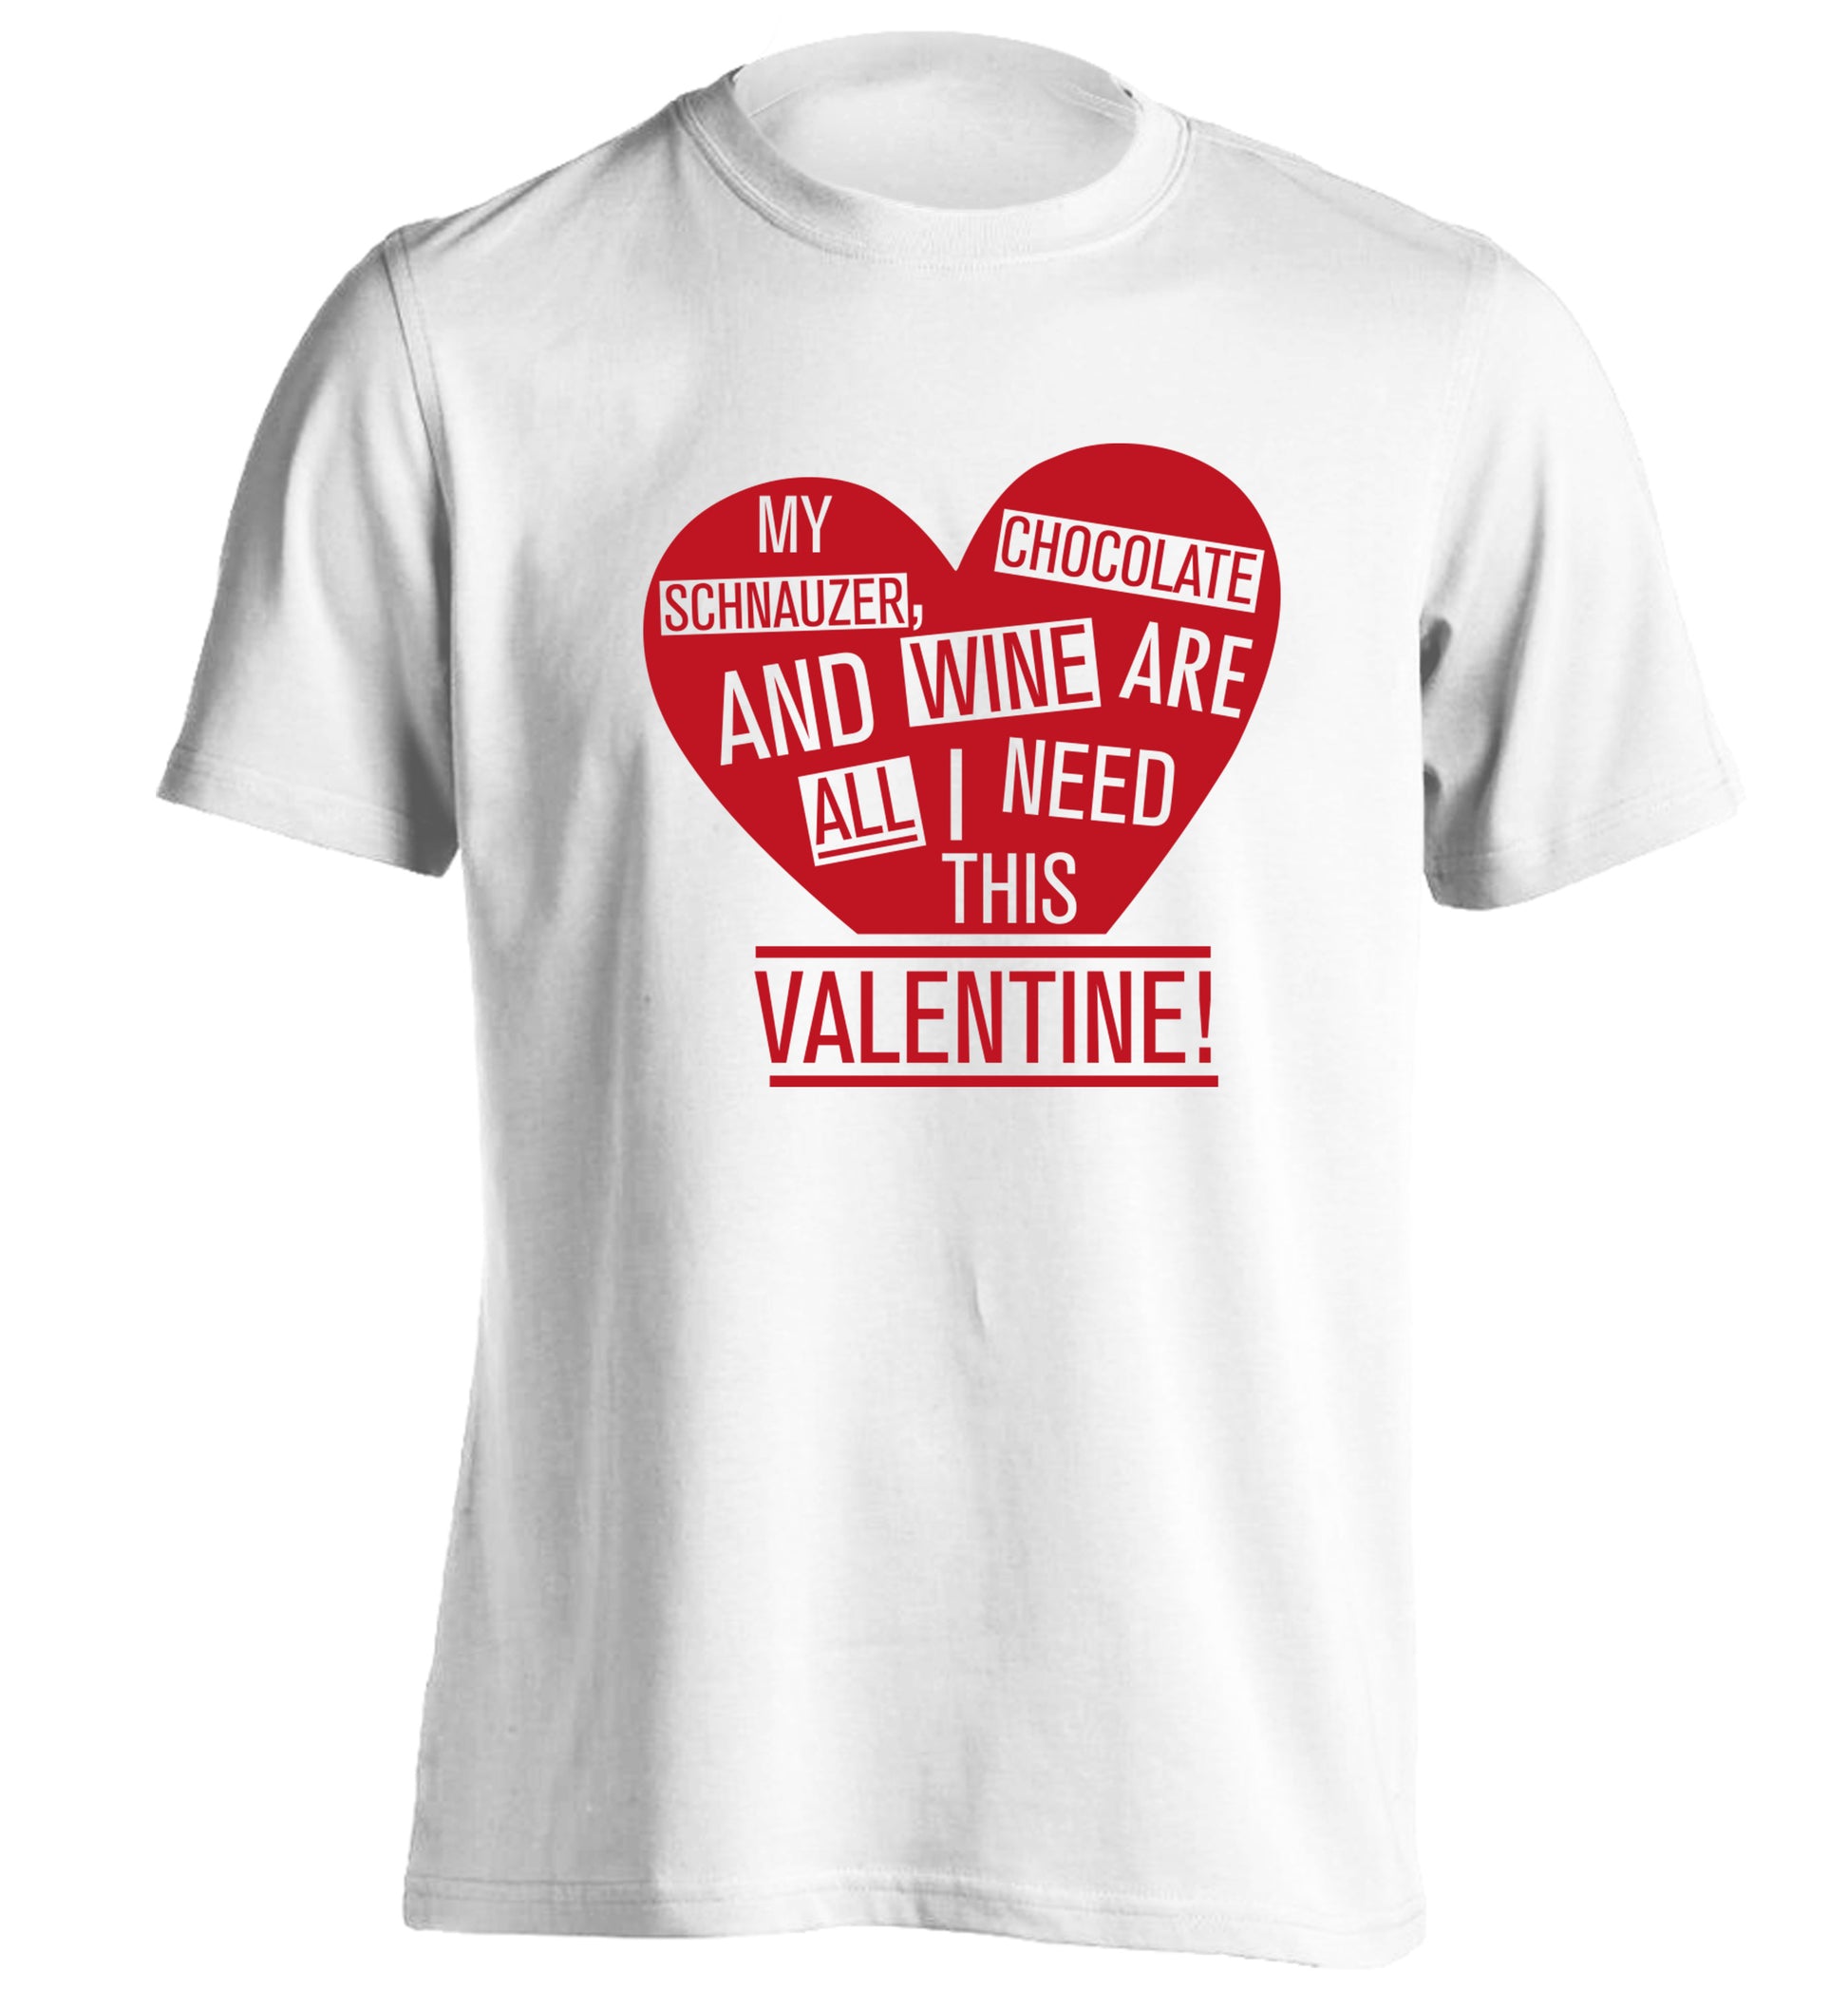 My schnauzer, chocolate and wine are all I need this valentine! adults unisex white Tshirt 2XL